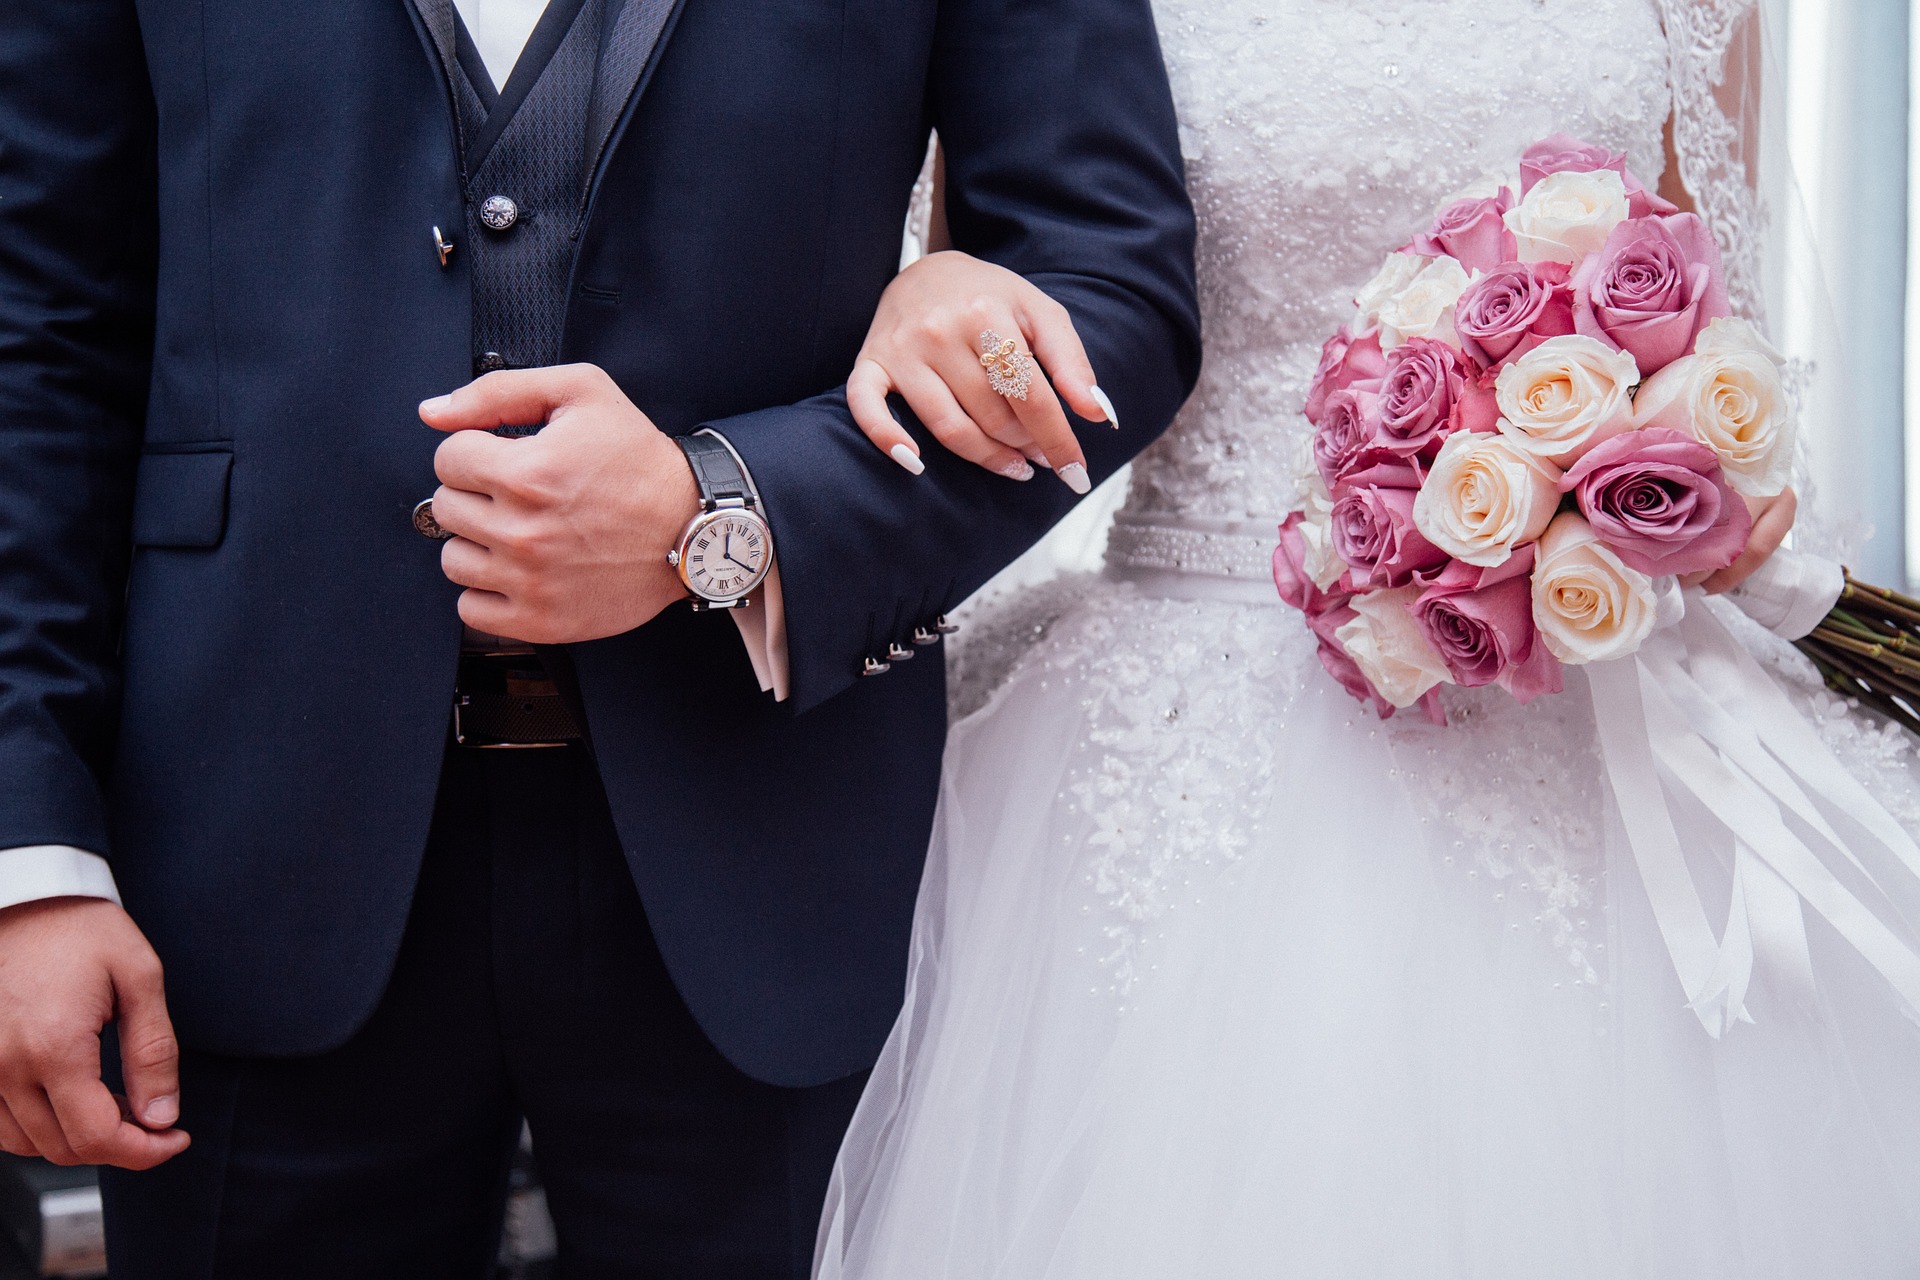 Wedding Insurance - What does it cover and do you need it?